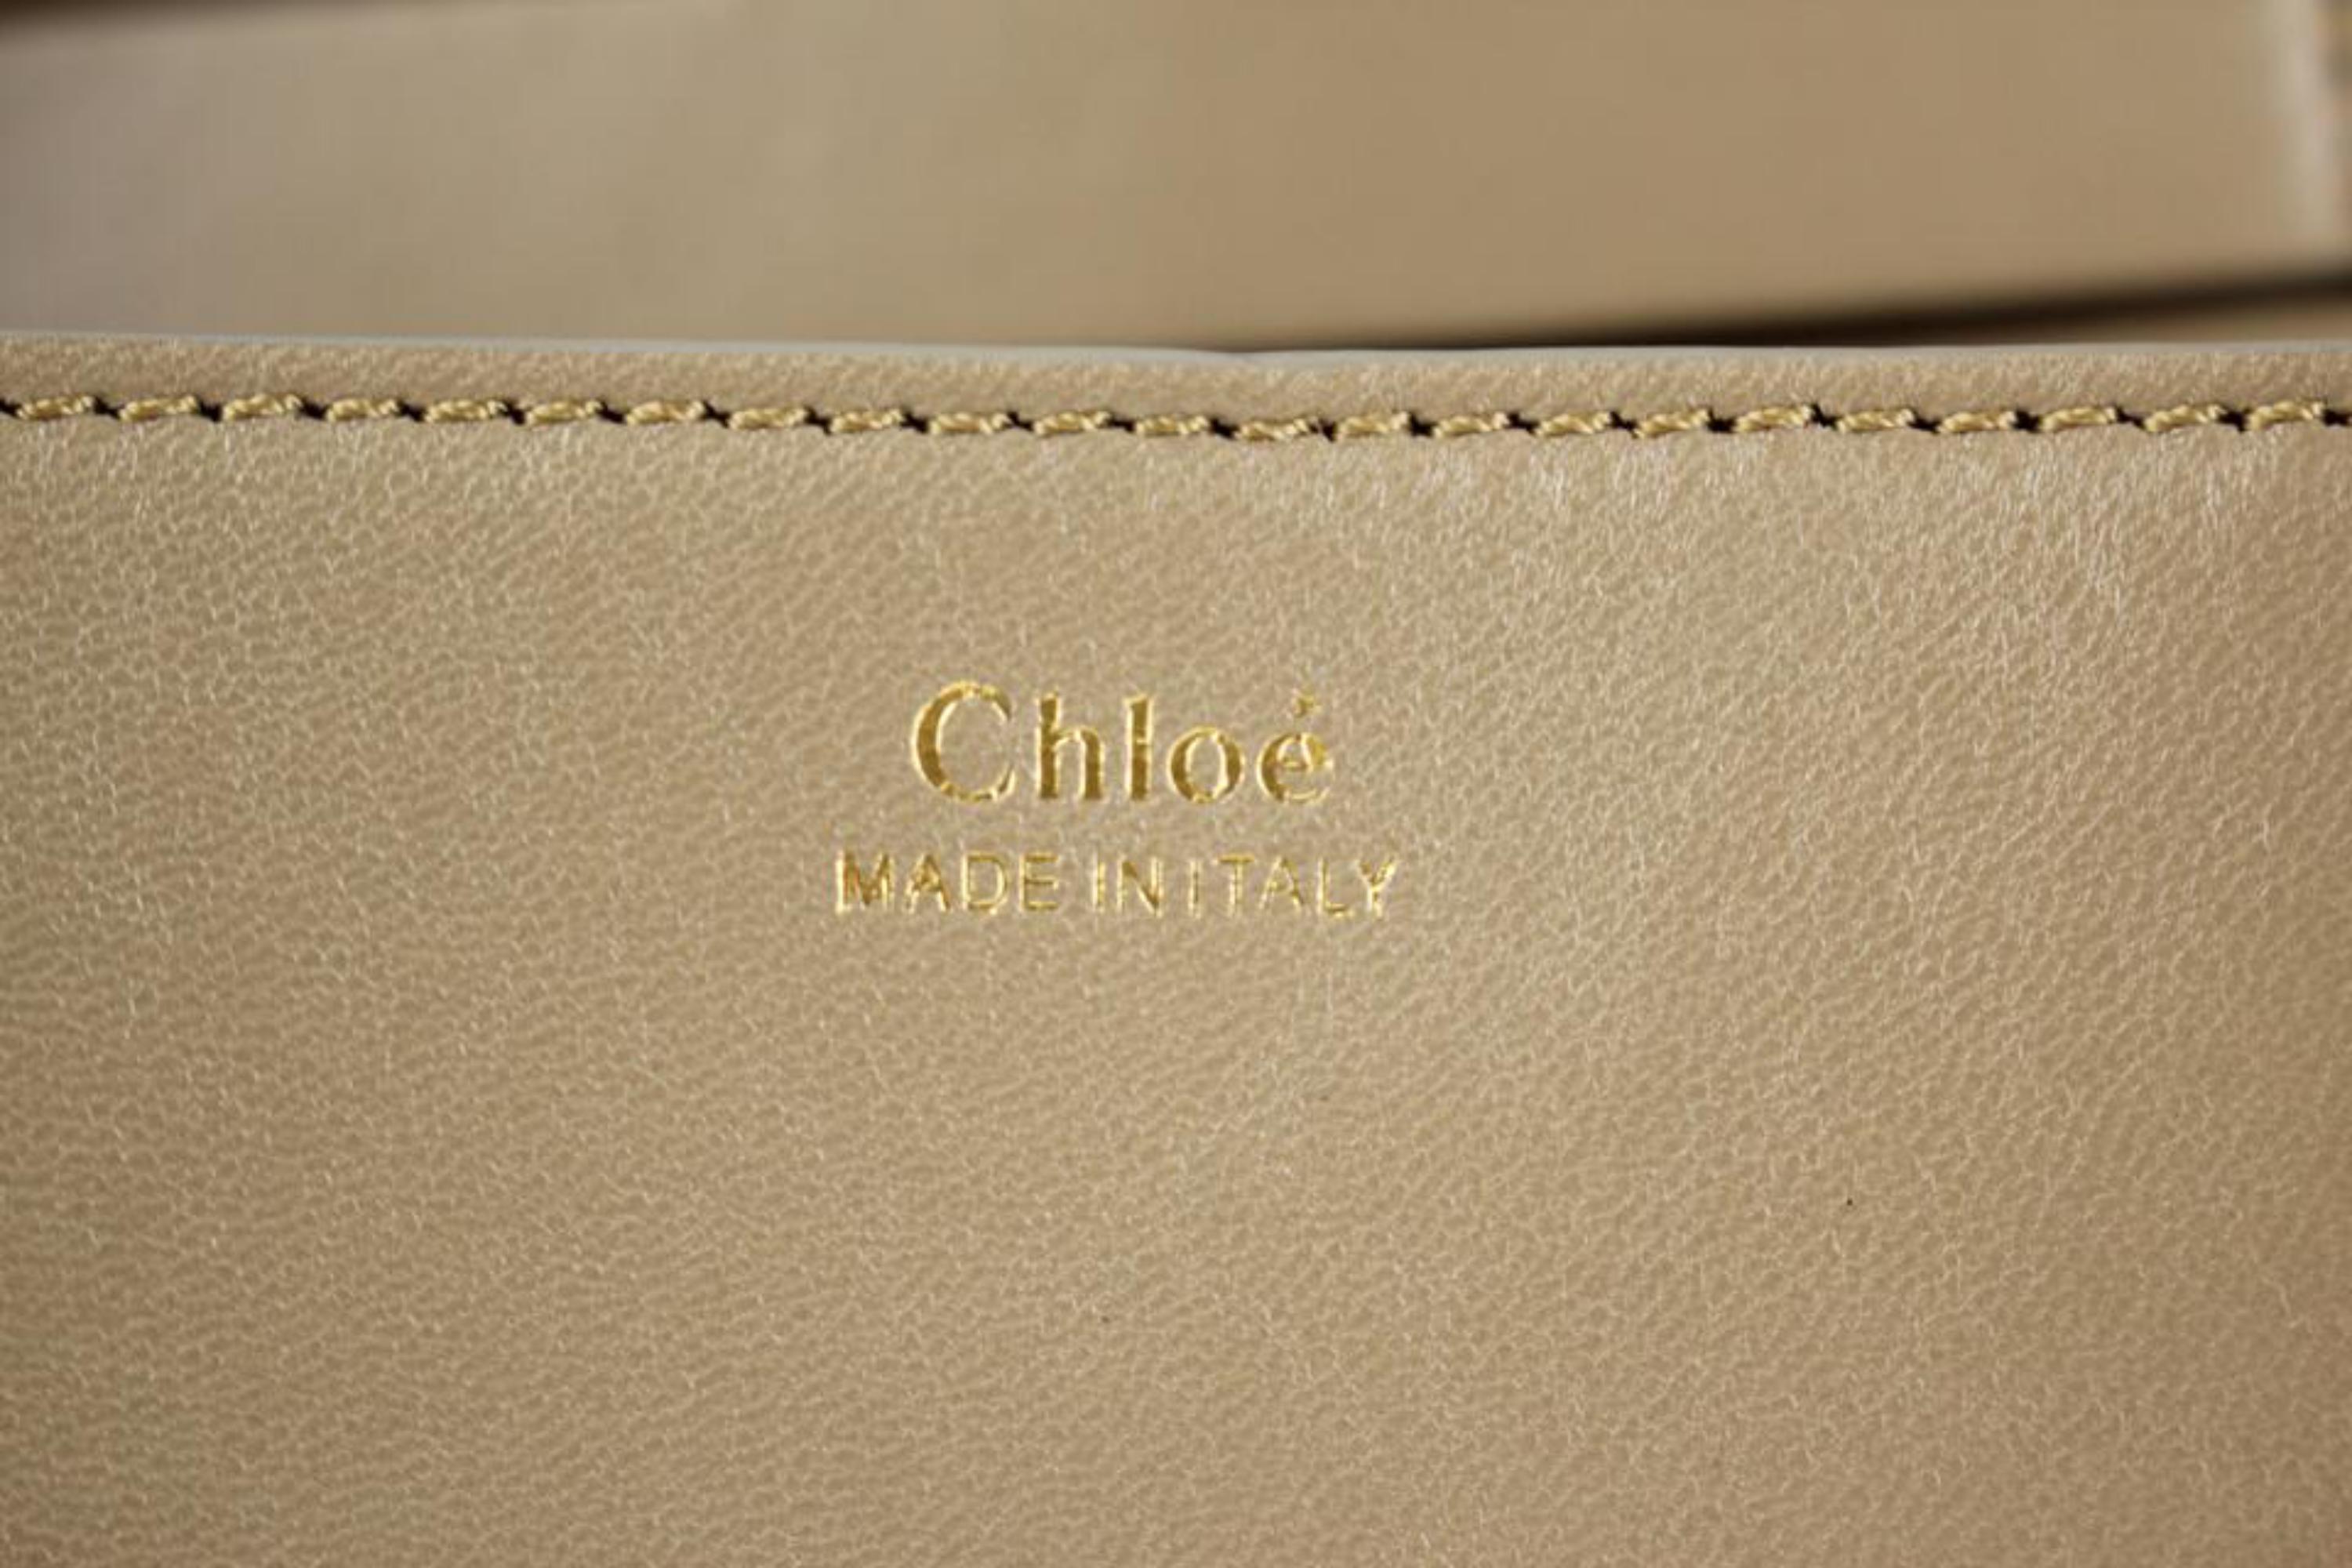 Chloé Drew Mini and Ostrich 825mt11 Beige Leather Cross Body Bag For Sale 8